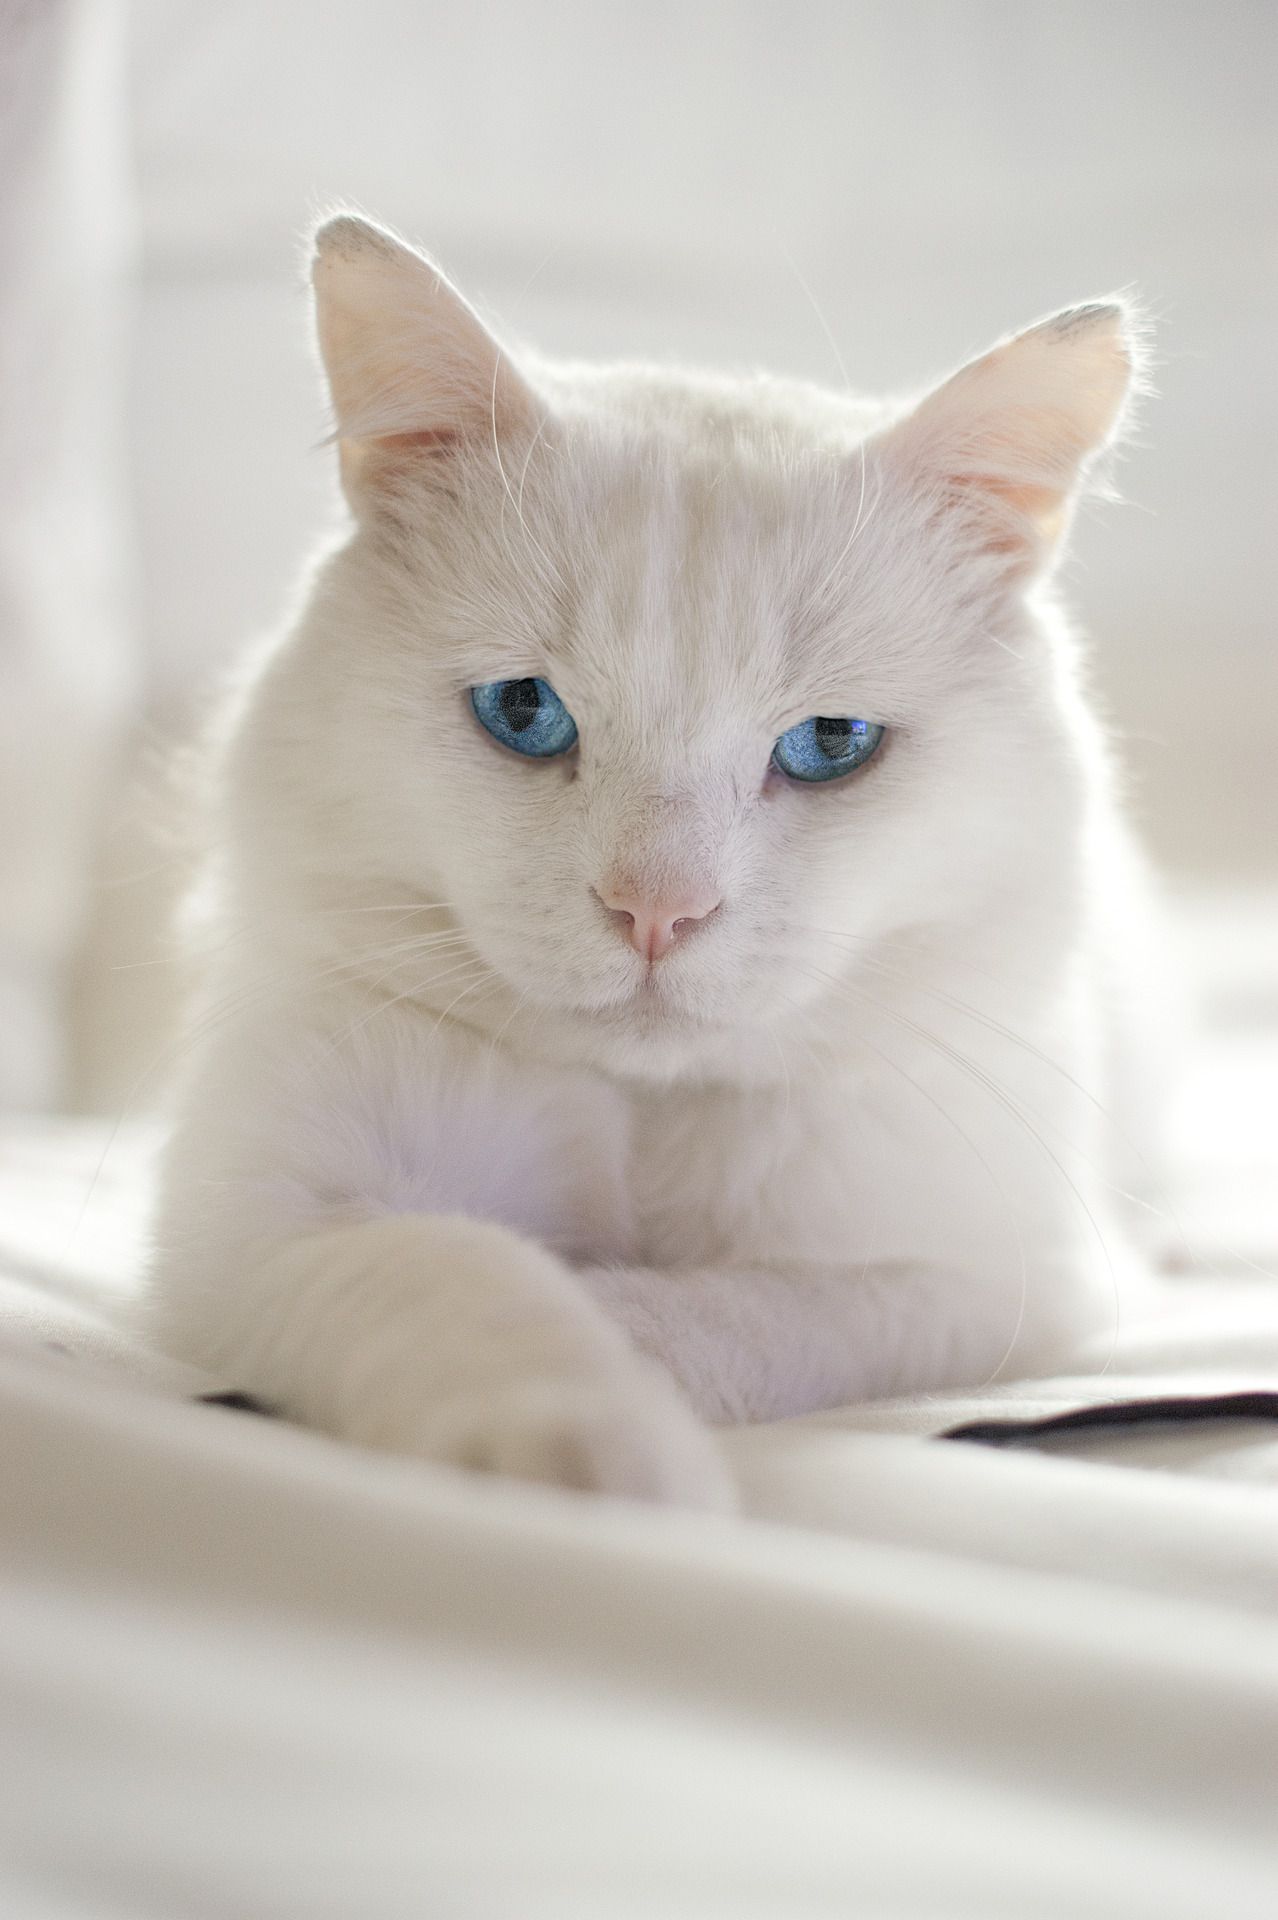 Beautiful Cat! I've always wanted a white cat with blue eyes ...